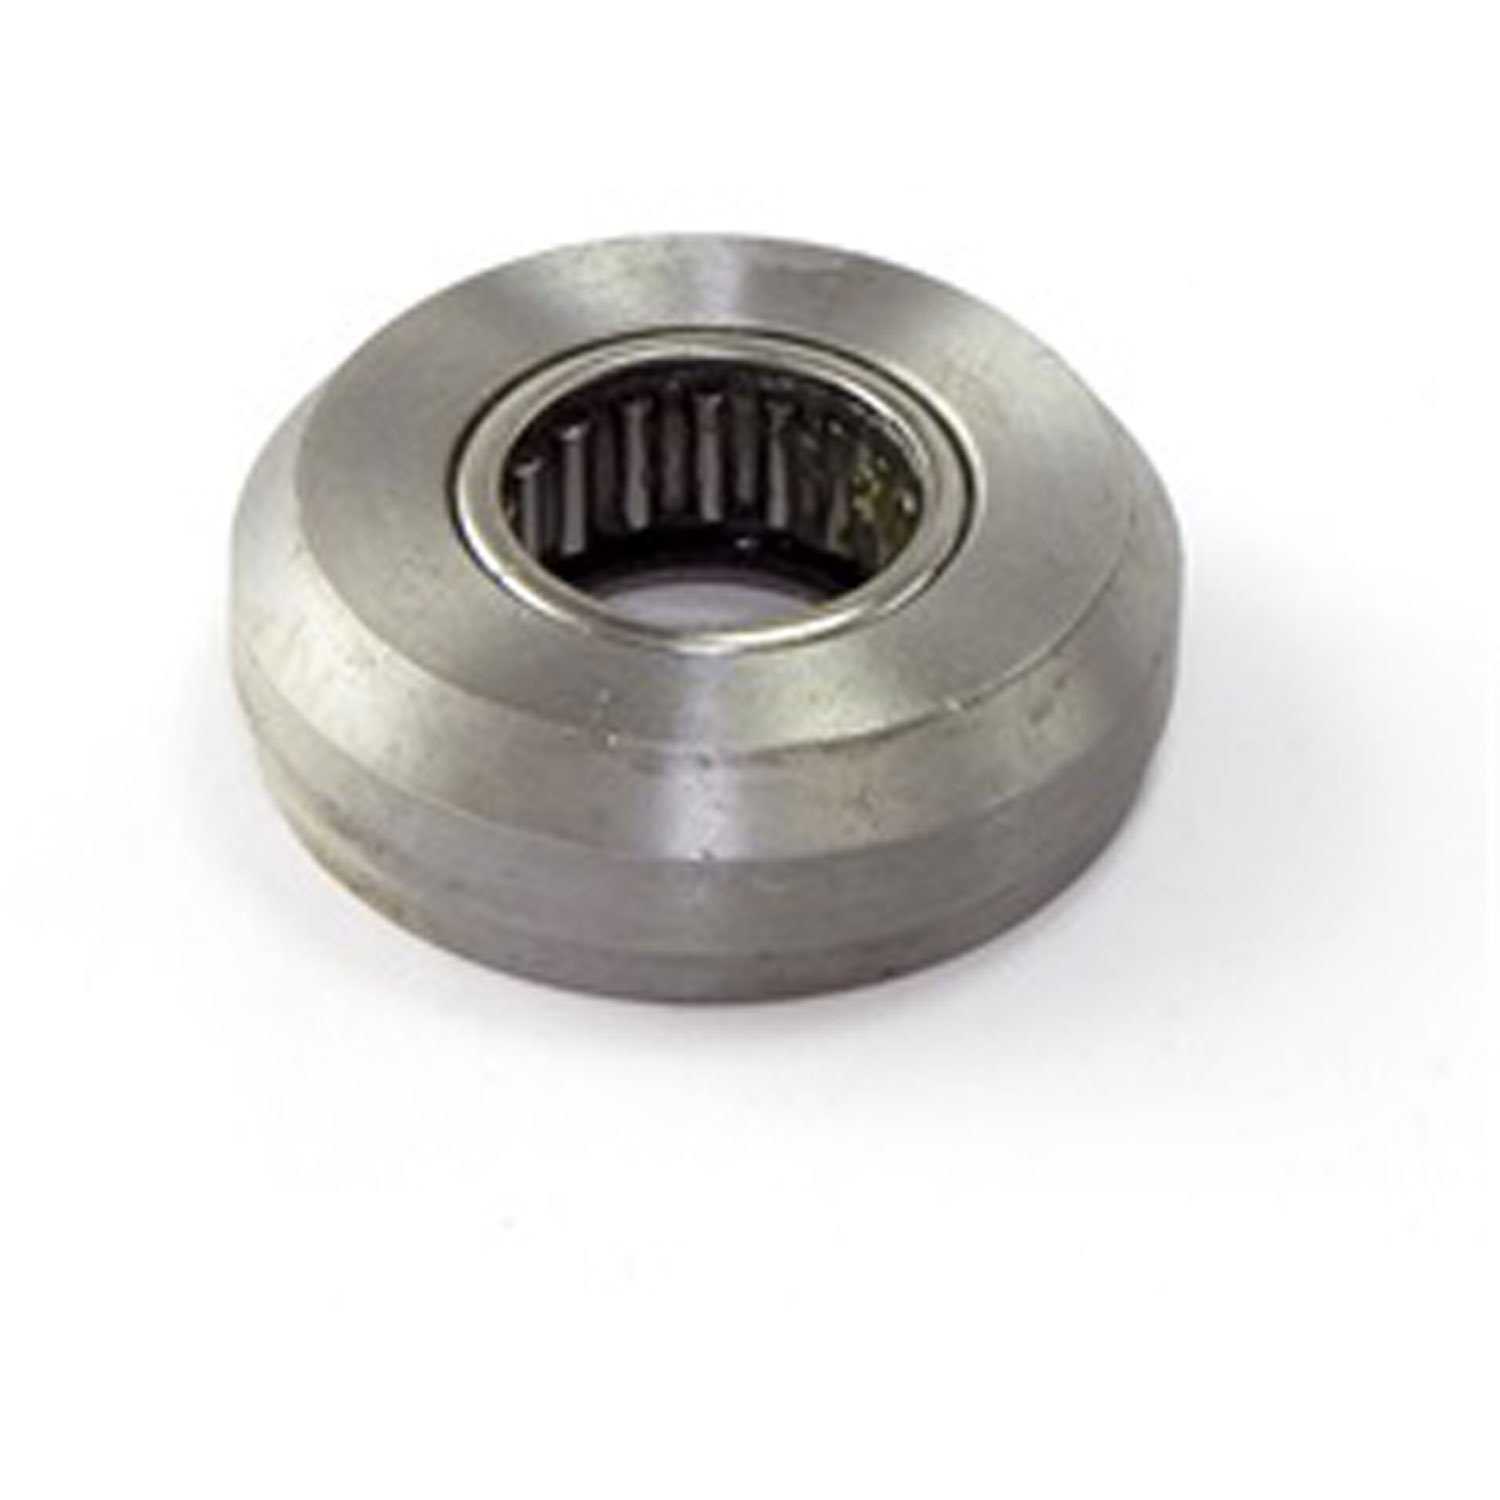 This pilot bearing from Omix-ADA fits 92-01 Cherokees with a 4.0L engine 97-06 Wranglers with a 2.5L